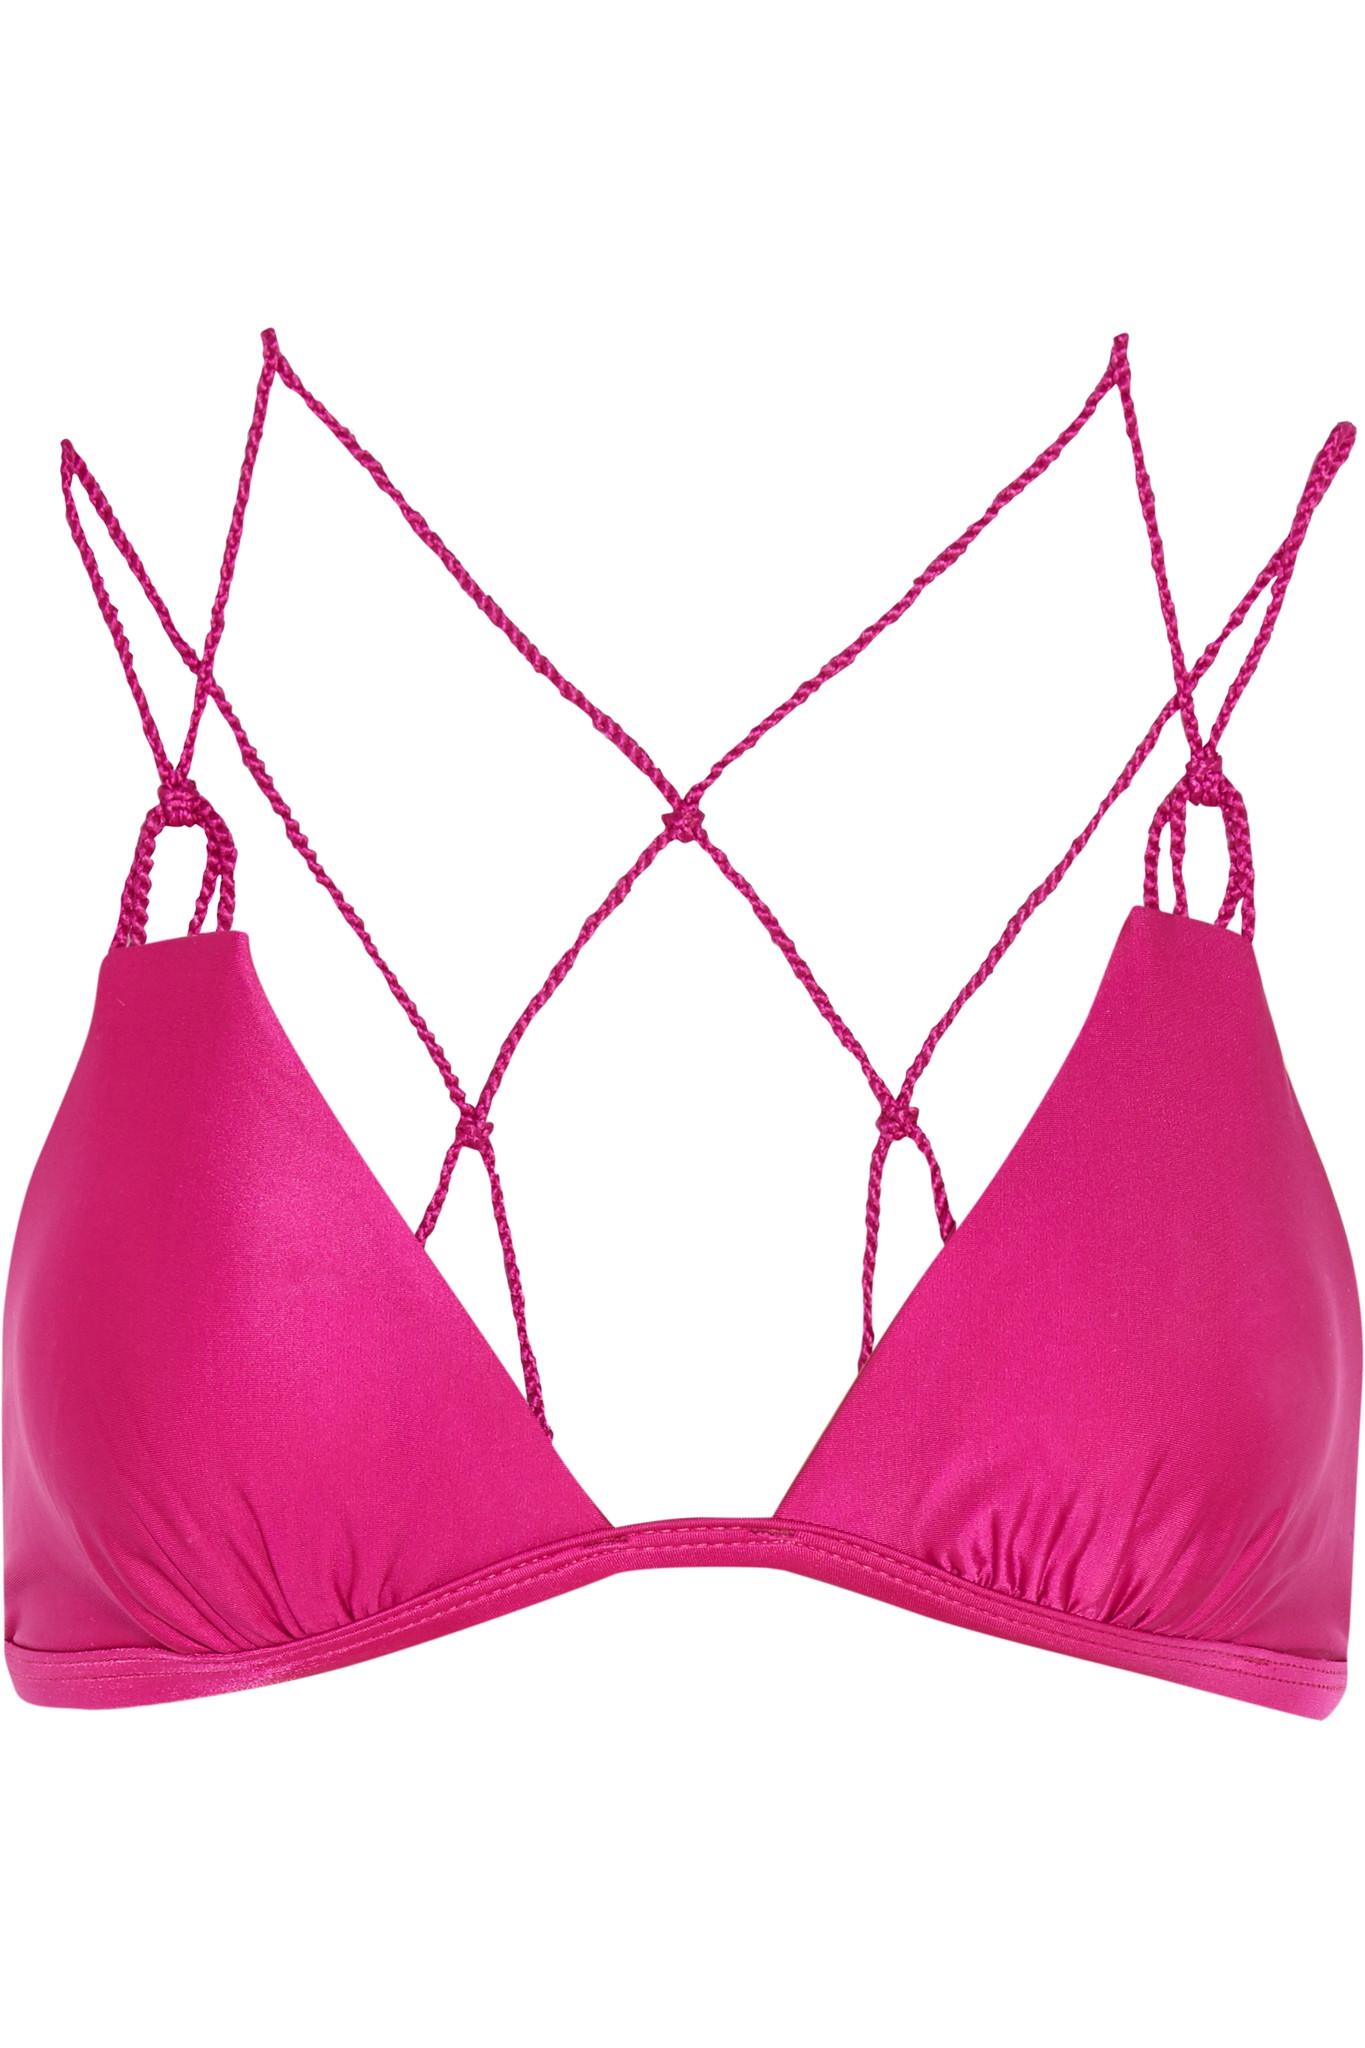 ViX Synthetic Braided Triangle Bikini Top in Magenta (Pink) - Lyst